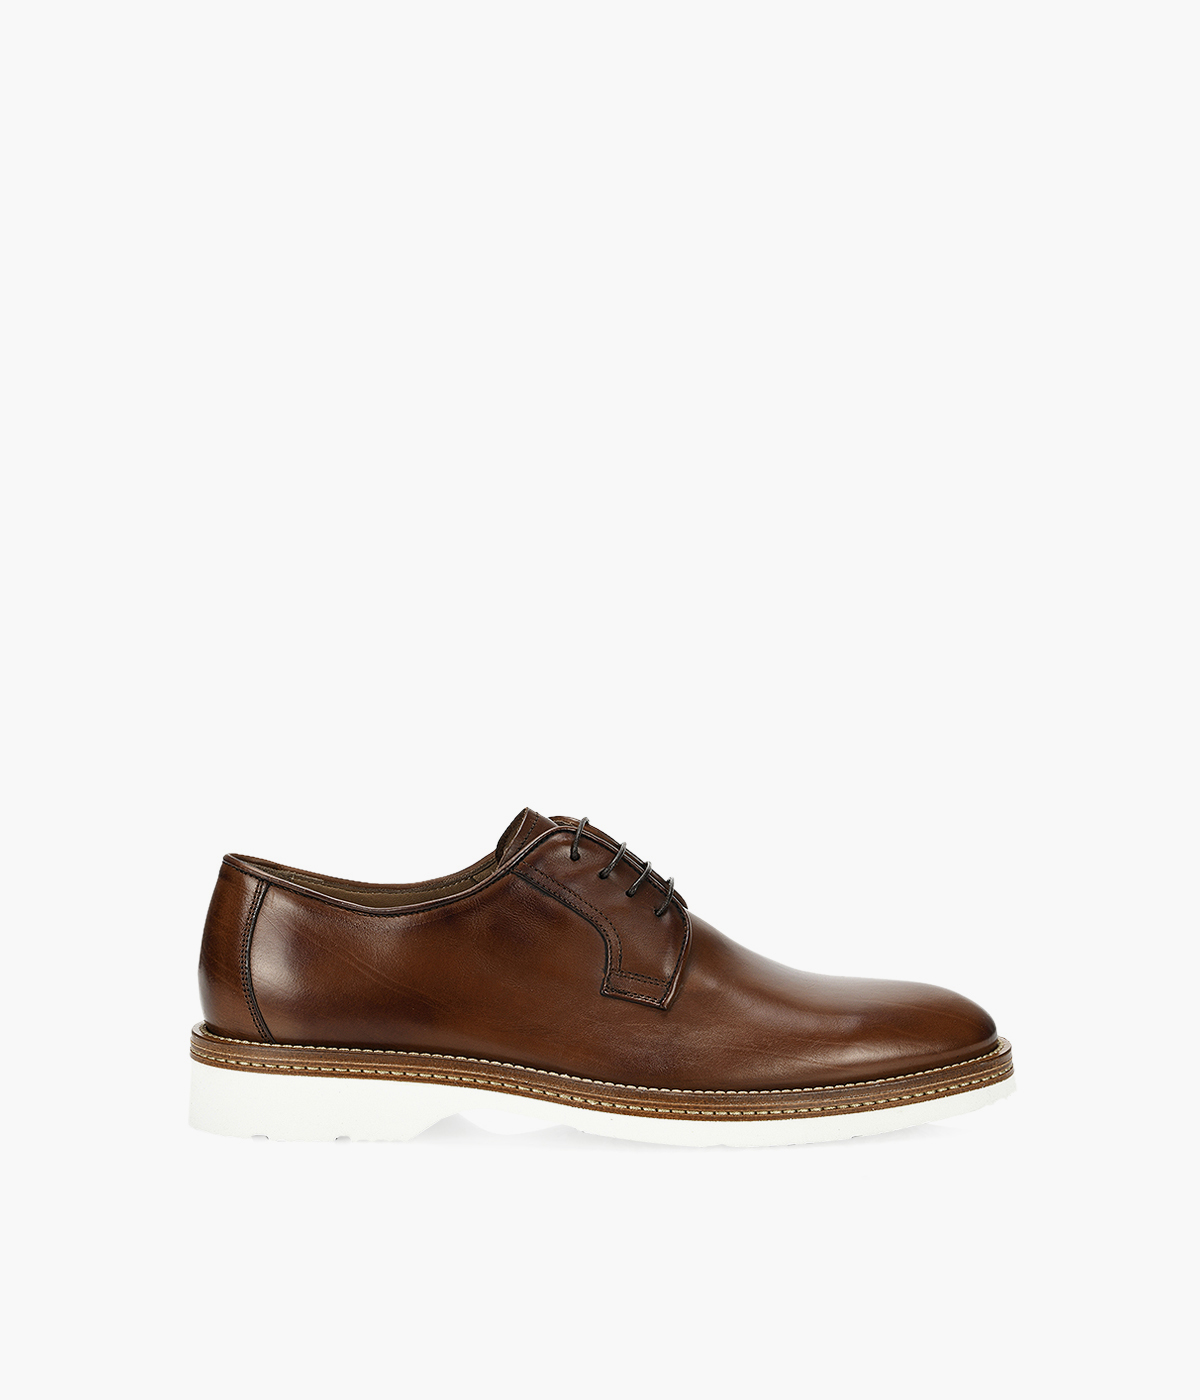 LUCA DEL FORTE 2133578 - Leather | Browns Shoes